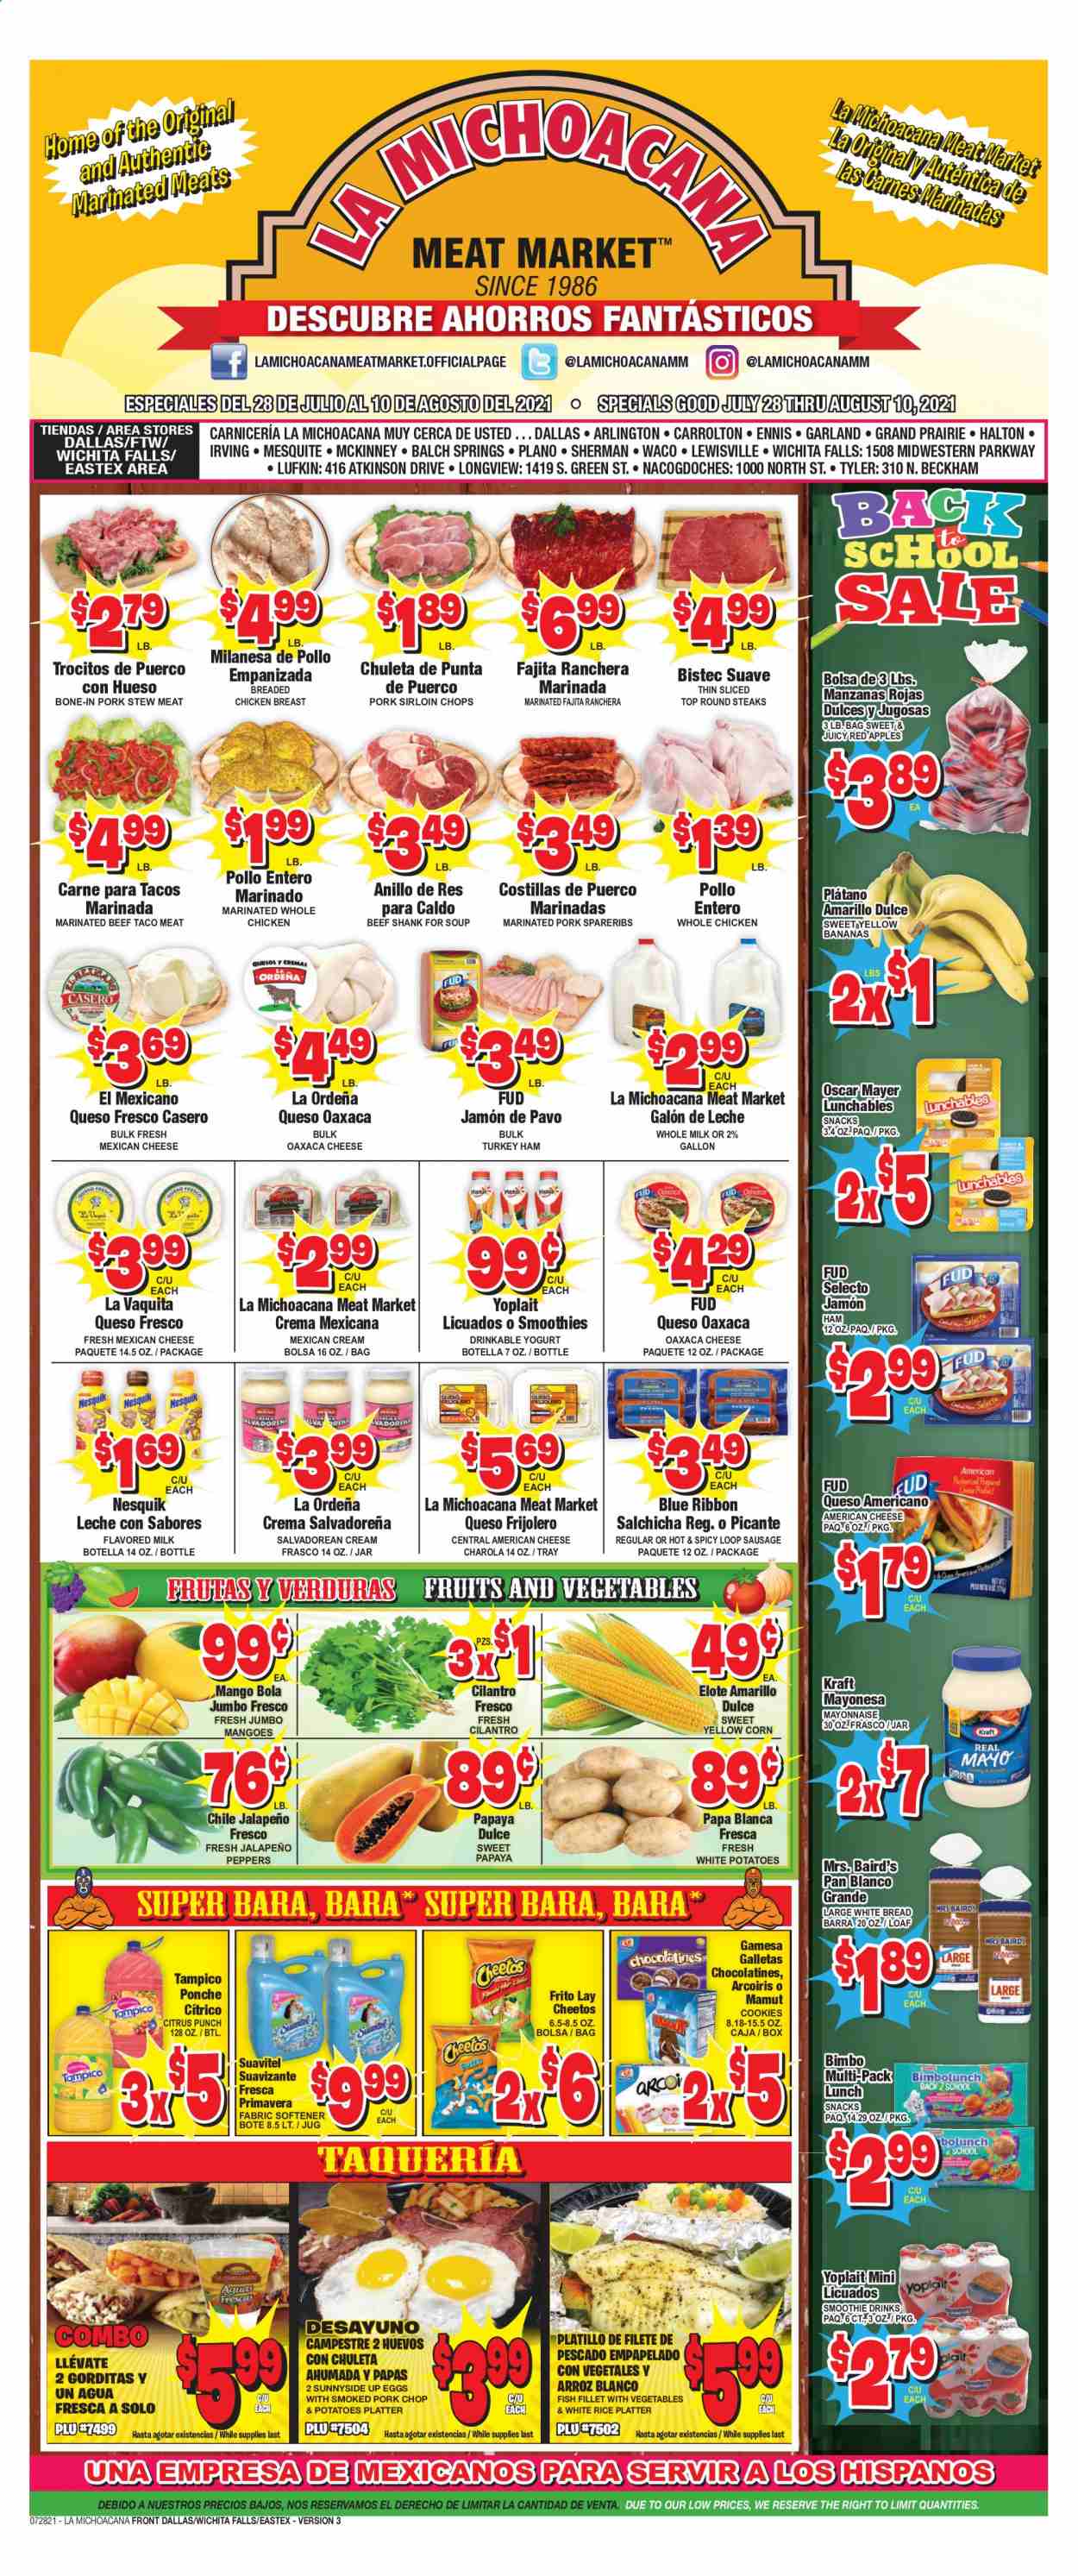 thumbnail - La Michoacana Meat Market Flyer - 07/28/2021 - 08/10/2021 - Sales products - stew meat, bread, white bread, corn, potatoes, peppers, jalapeño, apples, bananas, mango, papaya, fish fillets, fish, soup, fried chicken, Lunchables, Kraft®, ham, Oscar Mayer, sausage, american cheese, queso fresco, cheese, yoghurt, Nesquik, Yoplait, milk, flavoured milk, eggs, mayonnaise, cookies, snack, Cheetos, rice, white rice, cilantro, fruit punch, smoothie, whole chicken, beef meat, beef shank, steak, marinated beef, pork chops, pork loin, pork meat, pork spare ribs, marinated pork, fabric softener, Suave, pan. Page 1.